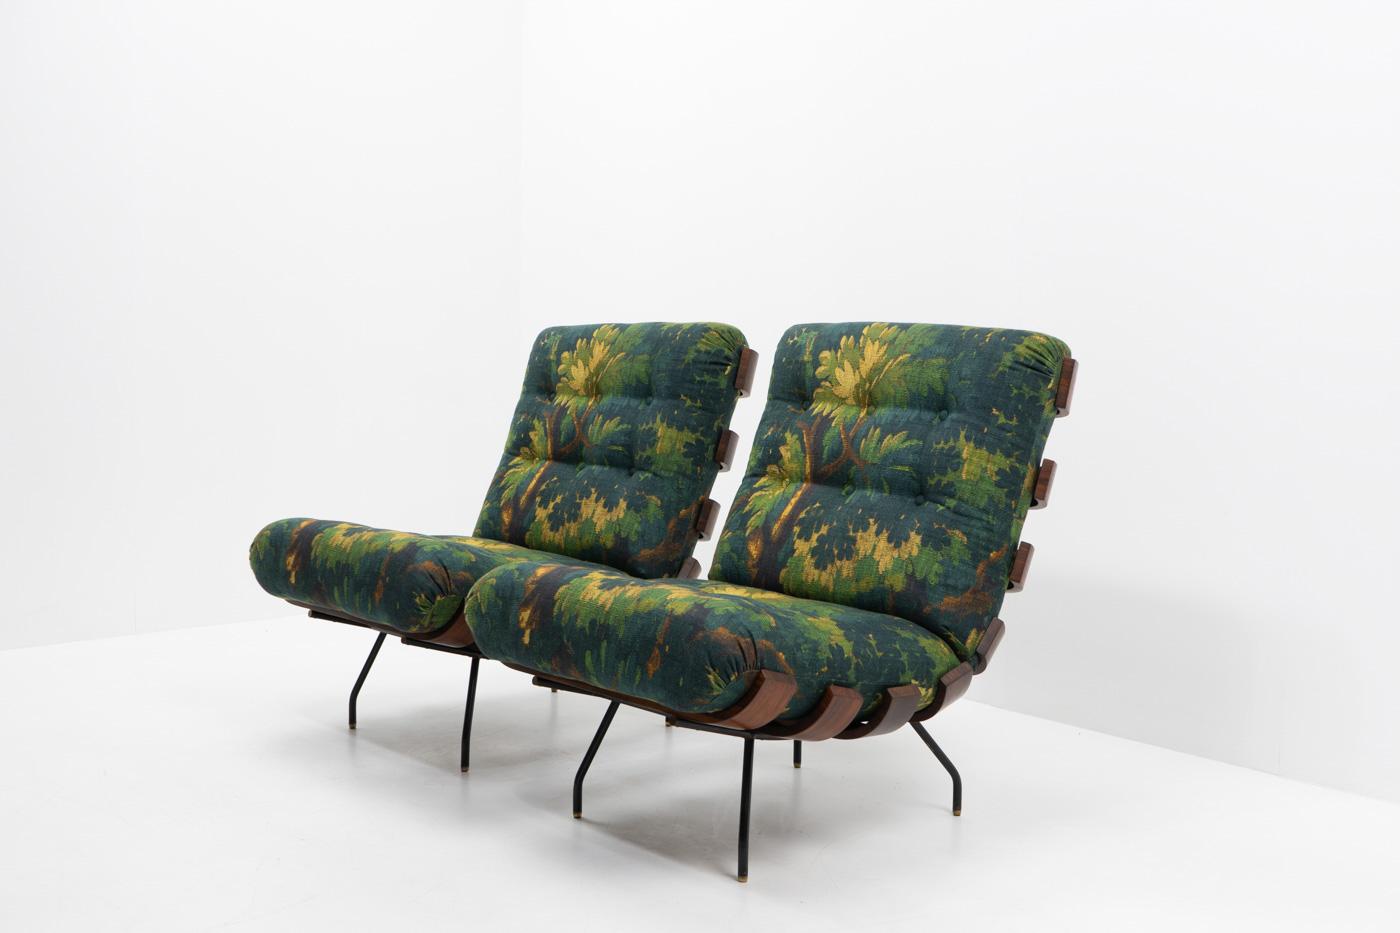 Metal Brazilian Design Costela Lounge Chairs by Hauner & Eisler for Forma, 1950s For Sale